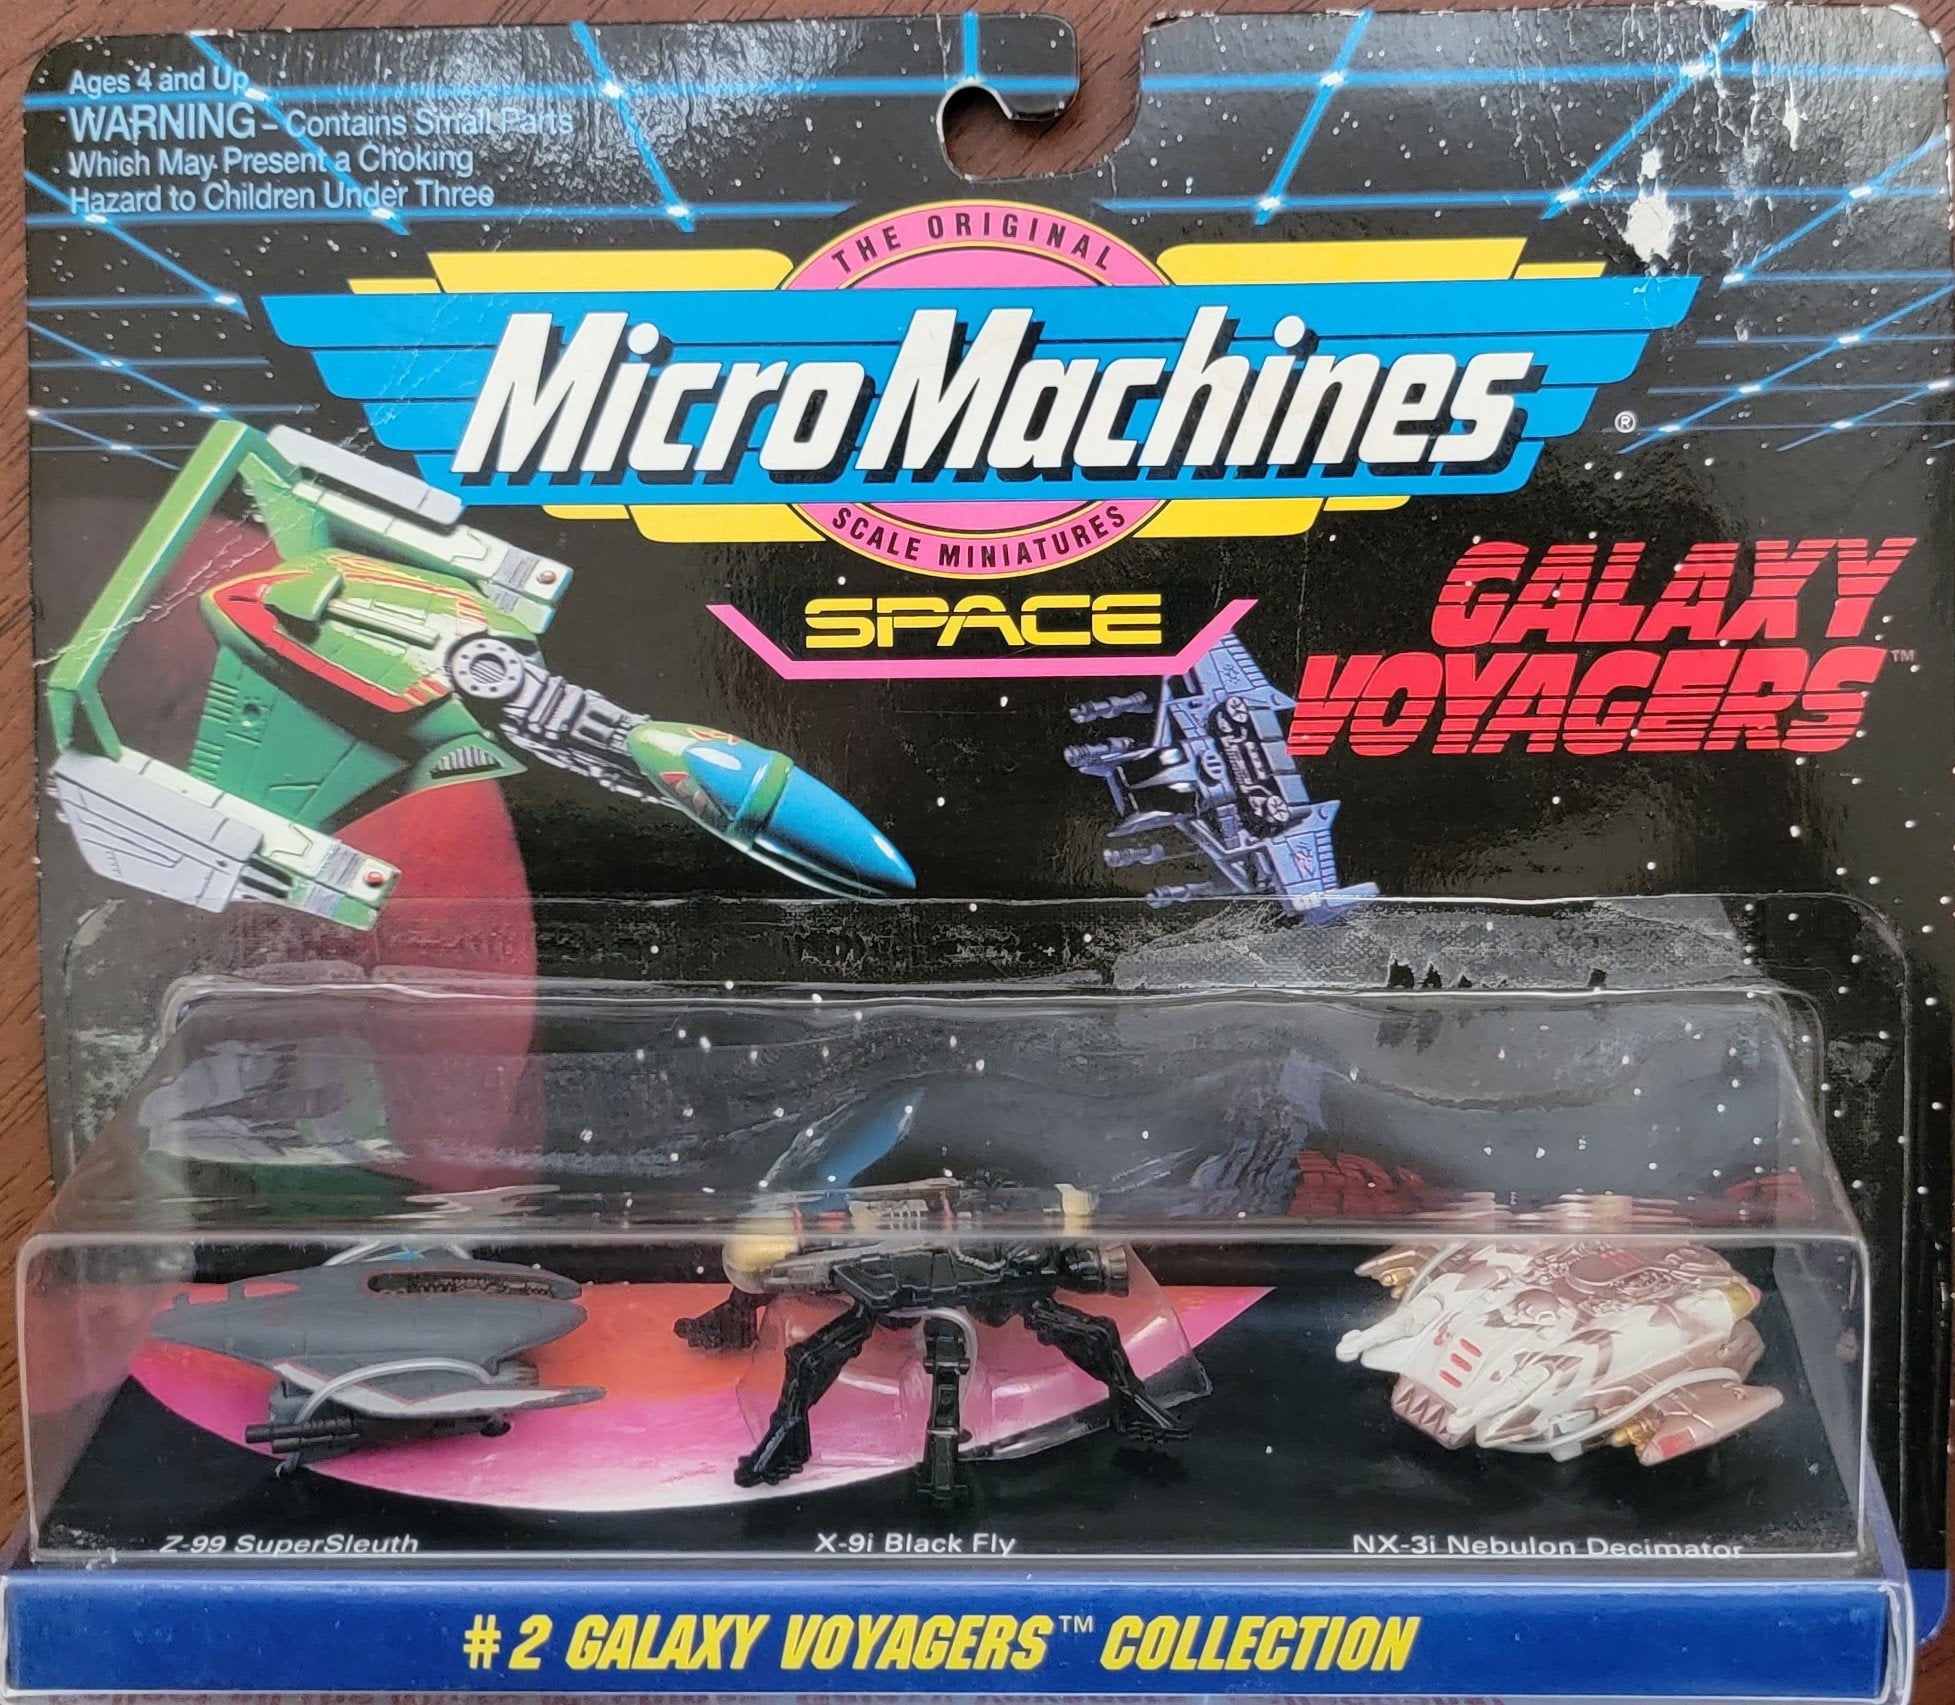 Micro Machines Galaxy Voyagers #2 Collectible Space Vehicle Miniature Toy Playset simple Xclusive Collectibles   